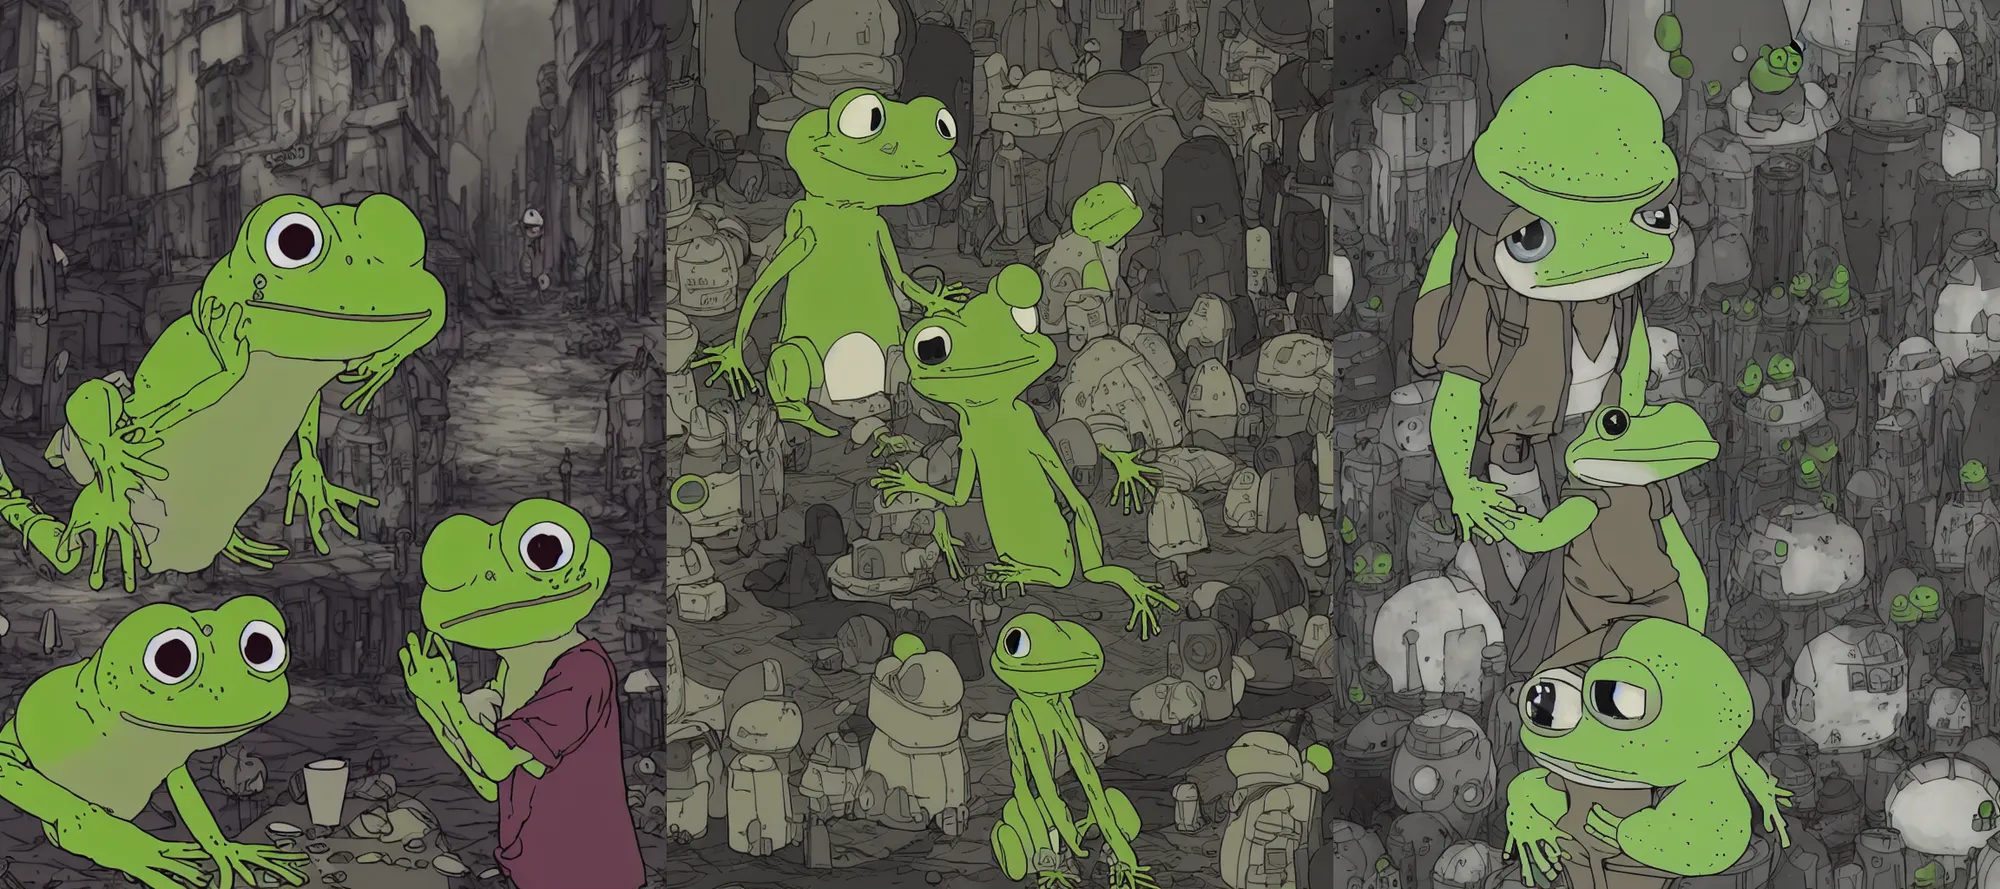 Prompt: resolution 4k worlds of loss and depression made in abyss design Akihito Tsukushi design body pepe the frogs group of them a bloody conflict body horror curse of the abyss war , battlefield darkness military drummer boy pepe , desolated city pepe the frog on an adventure with a party of other animals a strange and primordial background , pepe , focus on pepe in foreground ,sea of red water , ivory dream like storybooks, fractals , pepe the frogs at war, art in the style of and Oleg Vdovenko and Akihito Tsukushi